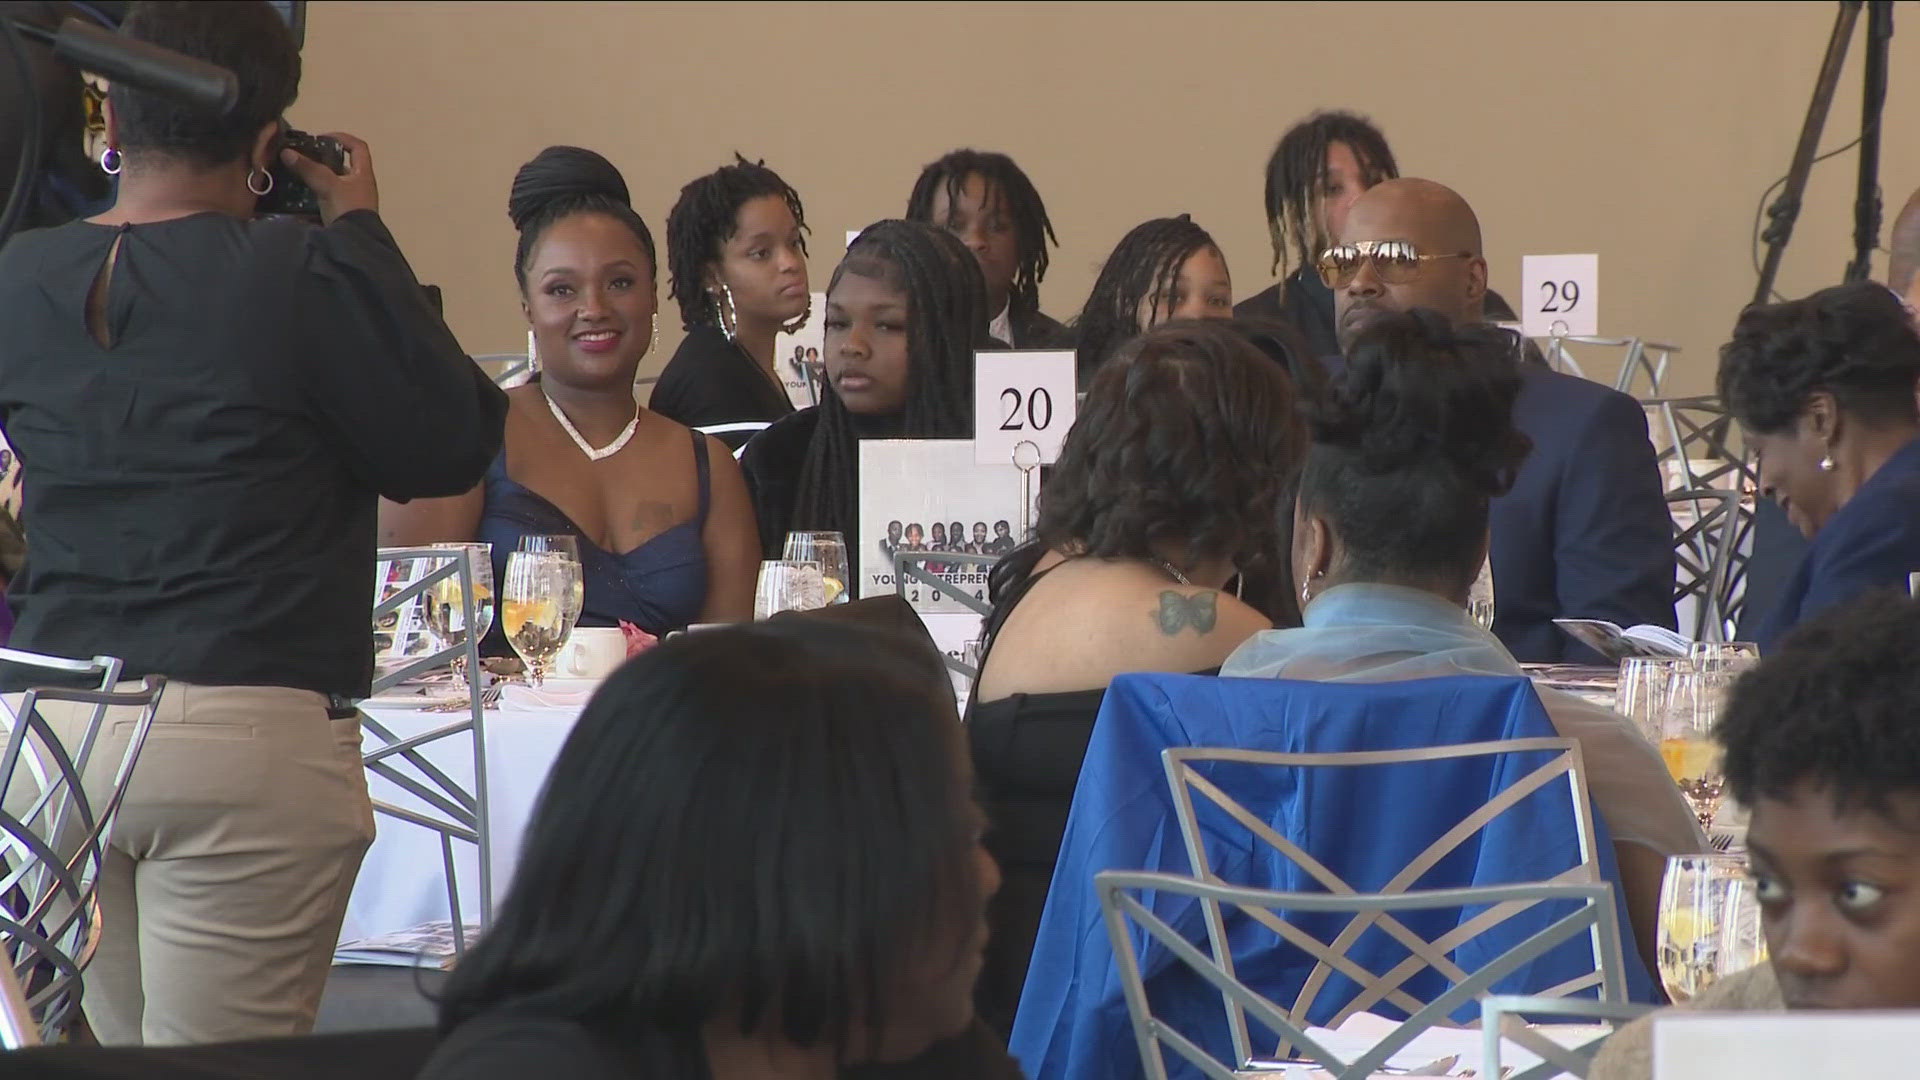 Empower 716: Young Entrepreneurs of Color gala gave local business professionals a chance to network. More than 300 members of the community took part.